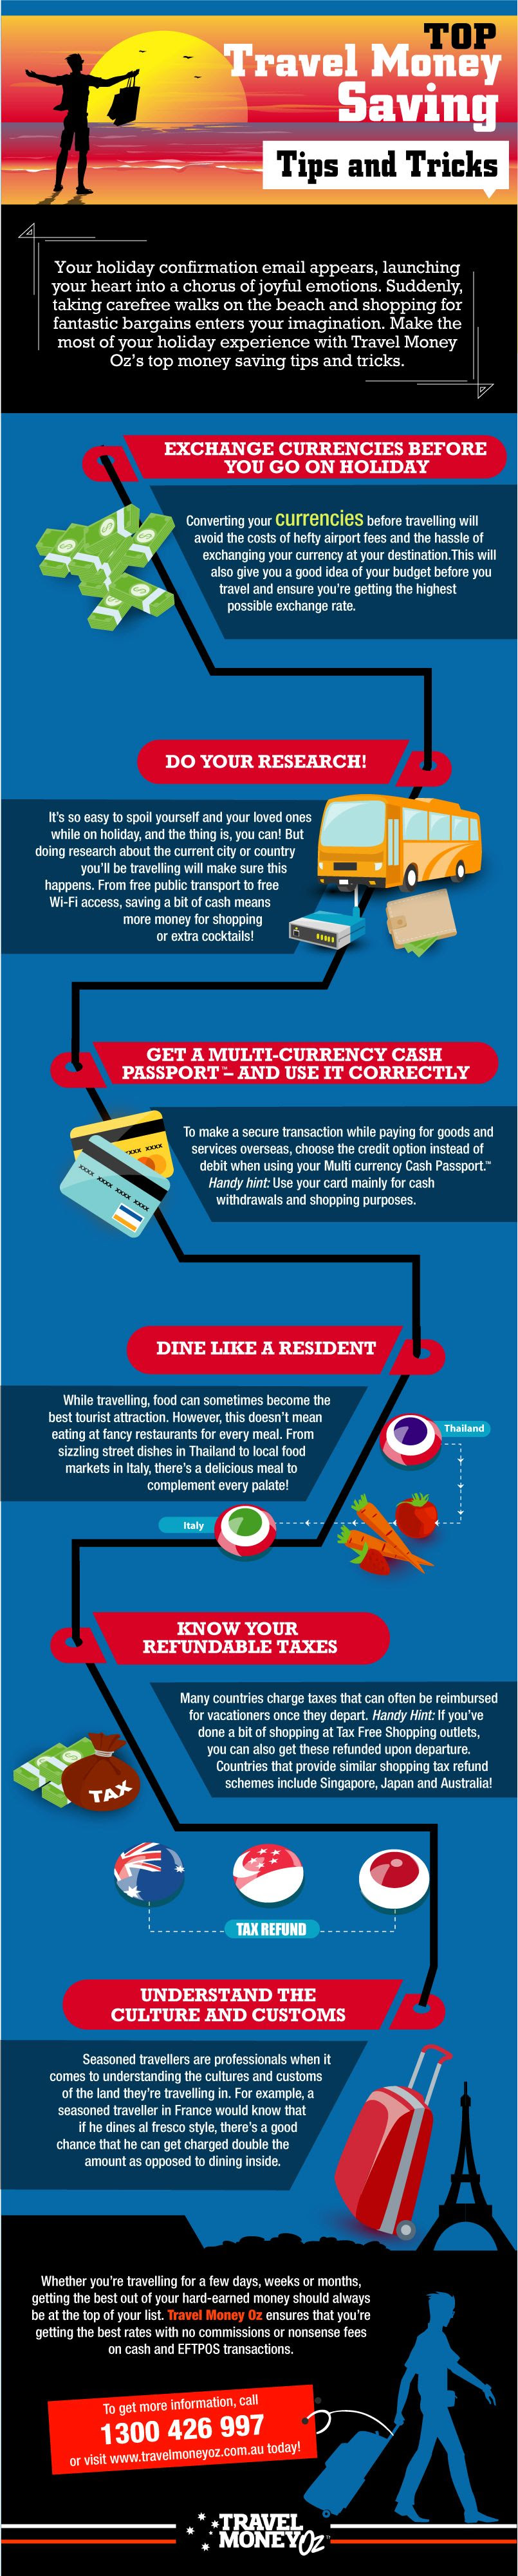 Infographic: Top Travel Money Saving Tips and Tricks